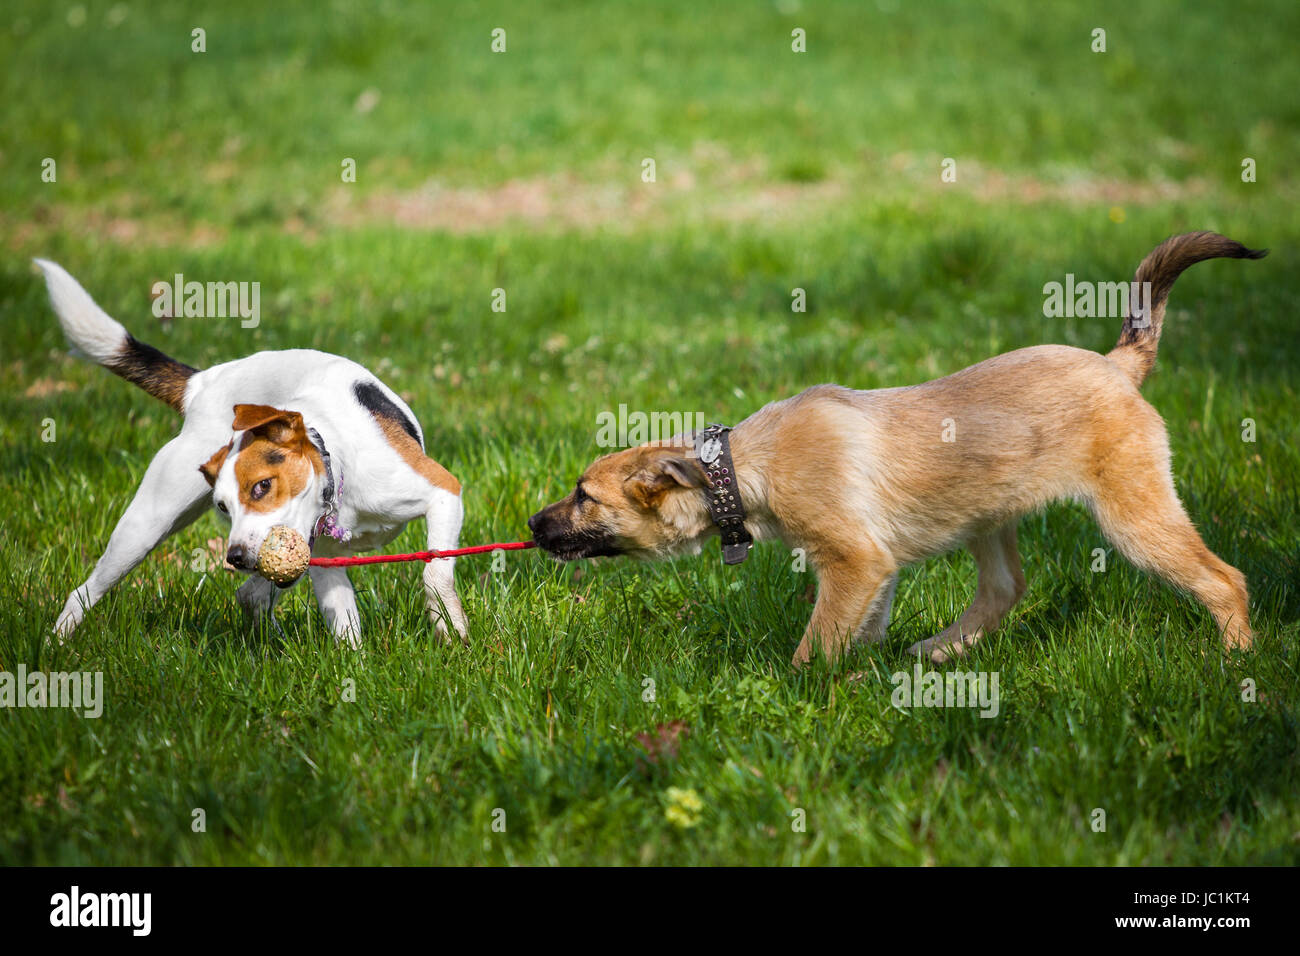 Wild Hunde High Resolution Stock Photography and Images - Alamy